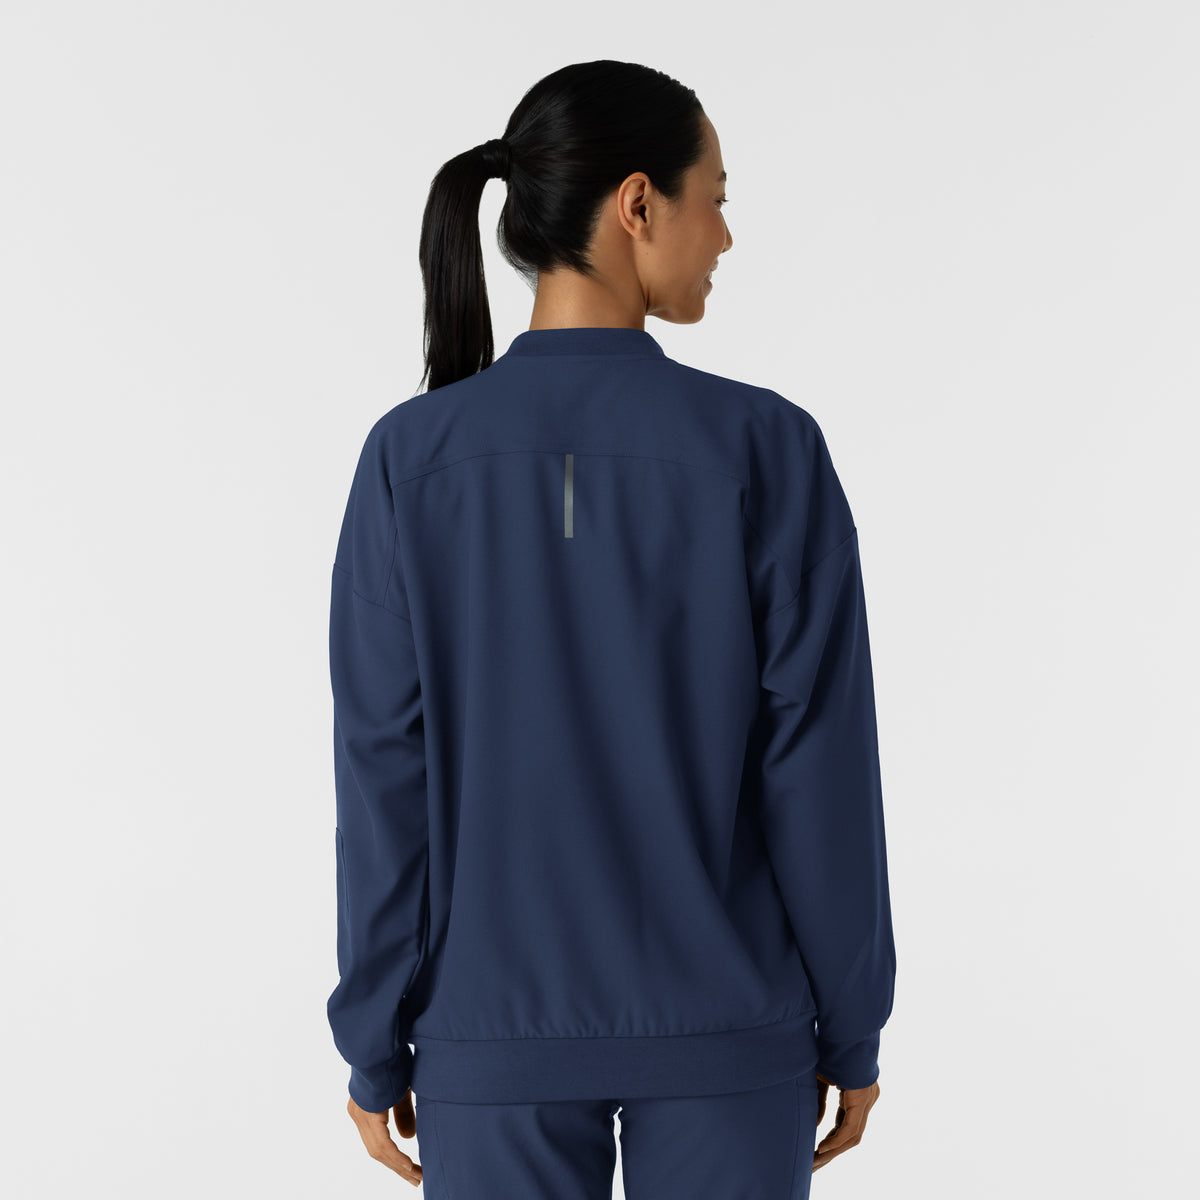 Knits and Layers Women's Bomber Scrub Jacket Navy back view